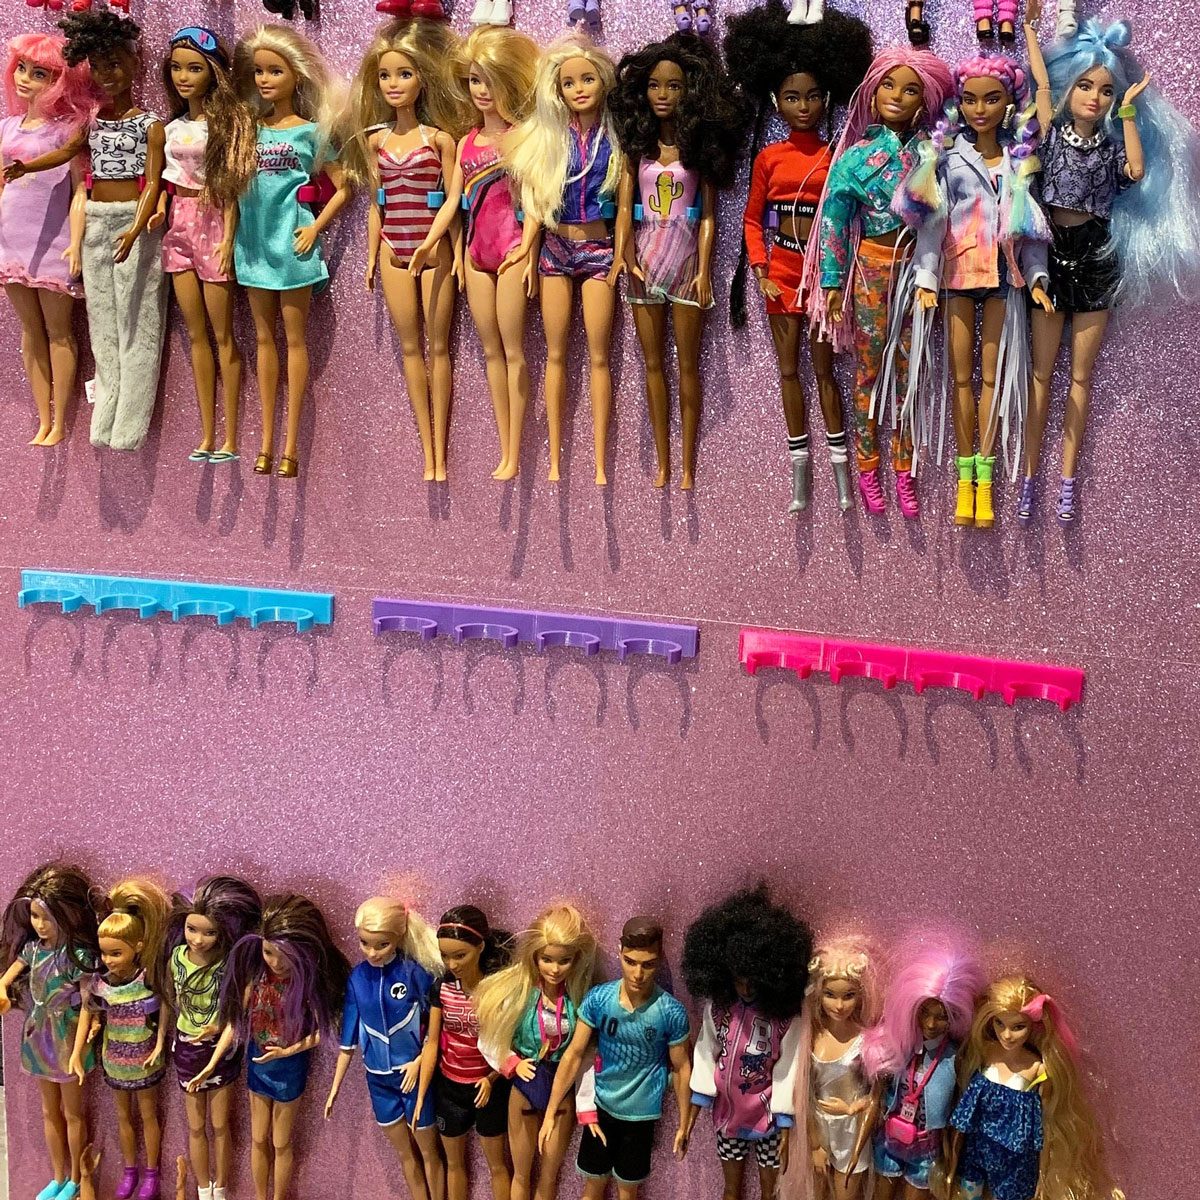 Clever Barbie Organization Ideas You and Your Kids Will Love